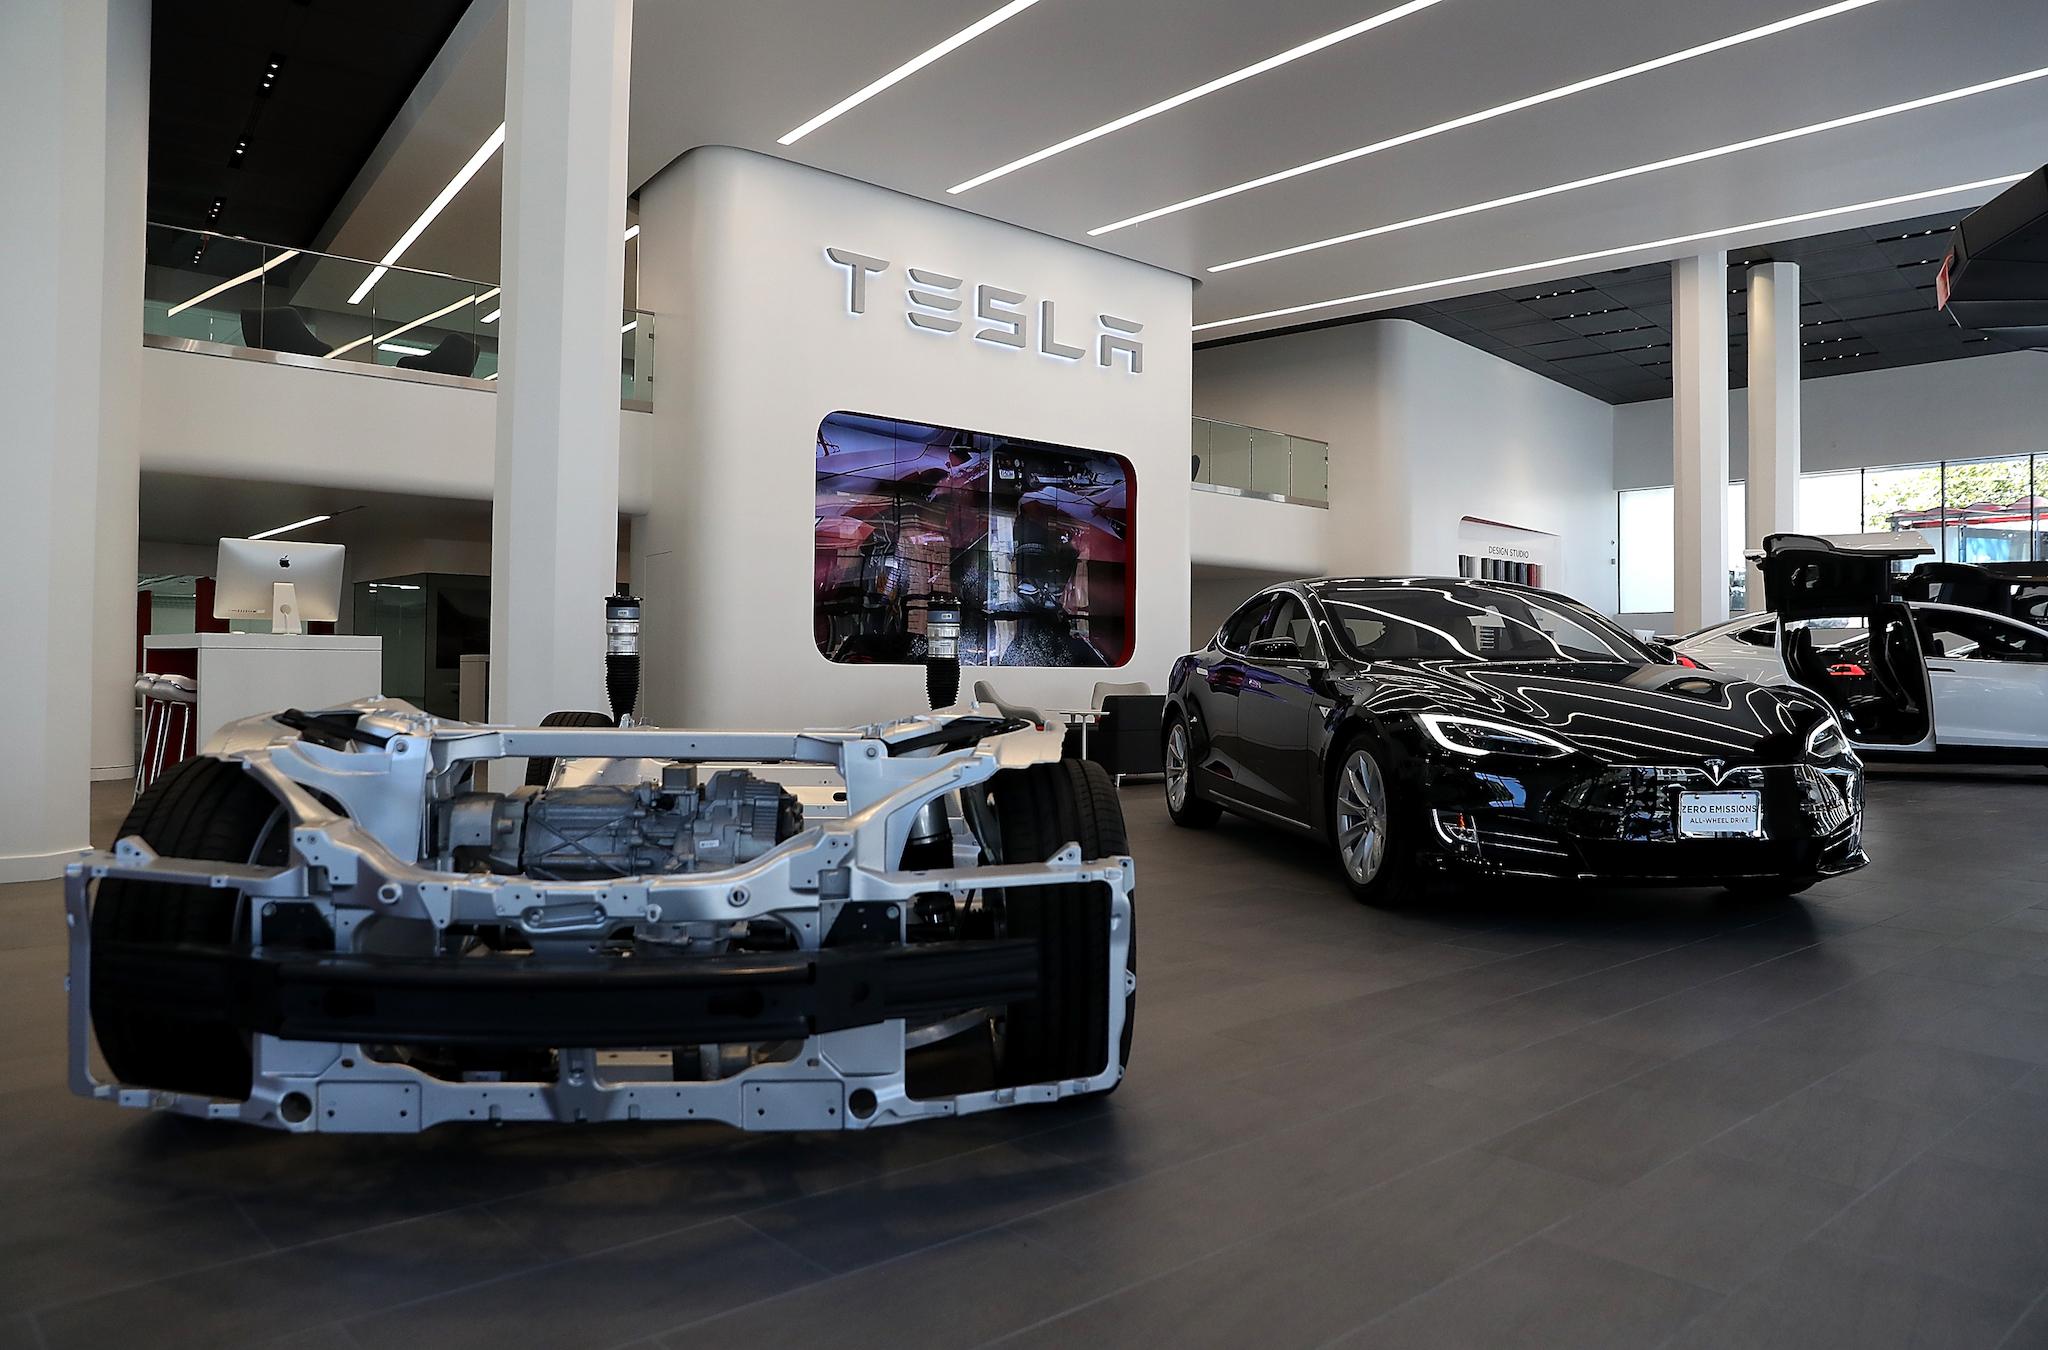 A Tesla Model S is displayed inside of the new Tesla flagship facility in San Francisco, California